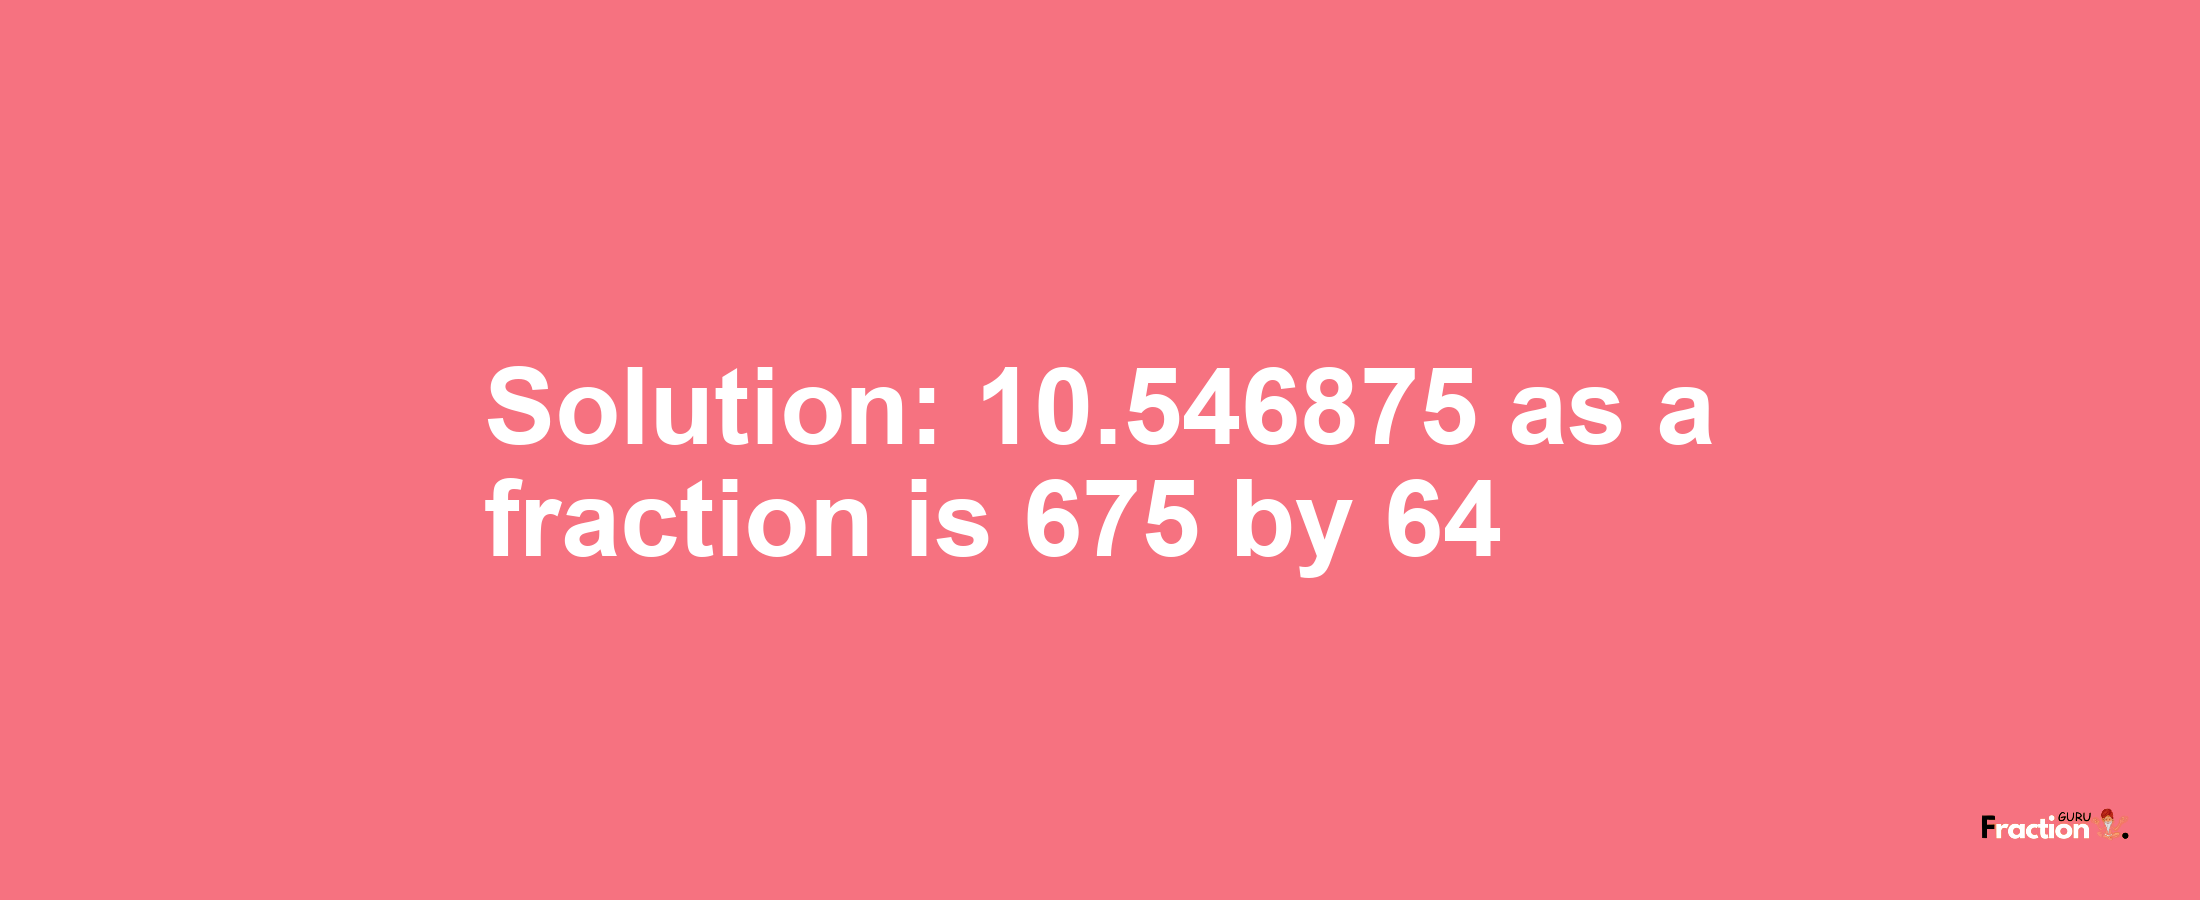 Solution:10.546875 as a fraction is 675/64